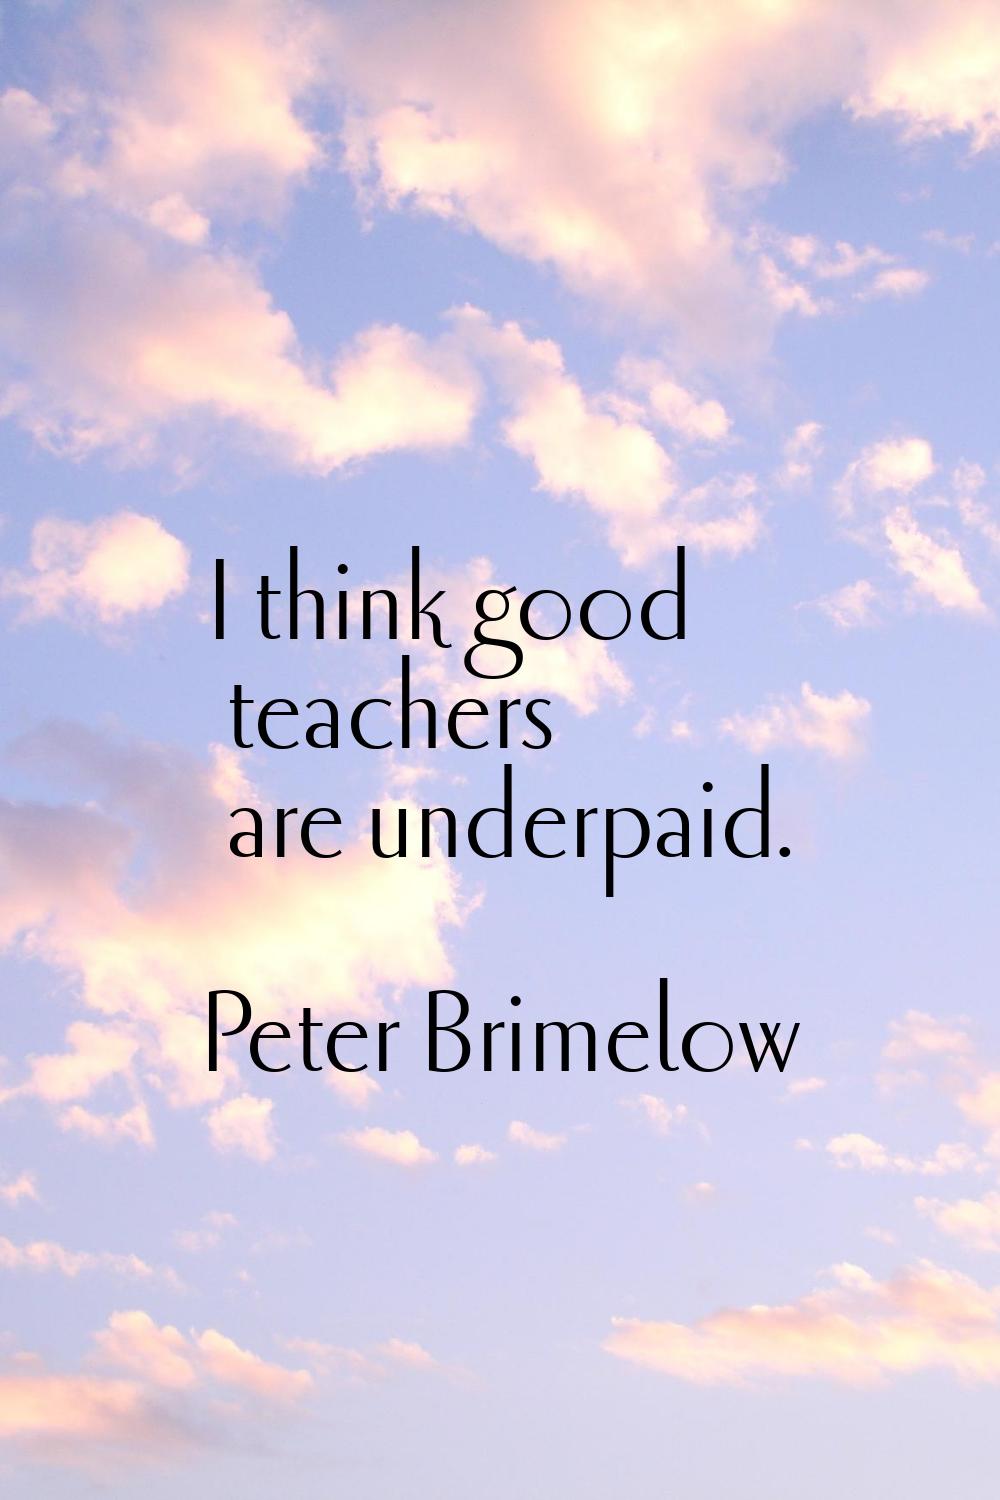 I think good teachers are underpaid.